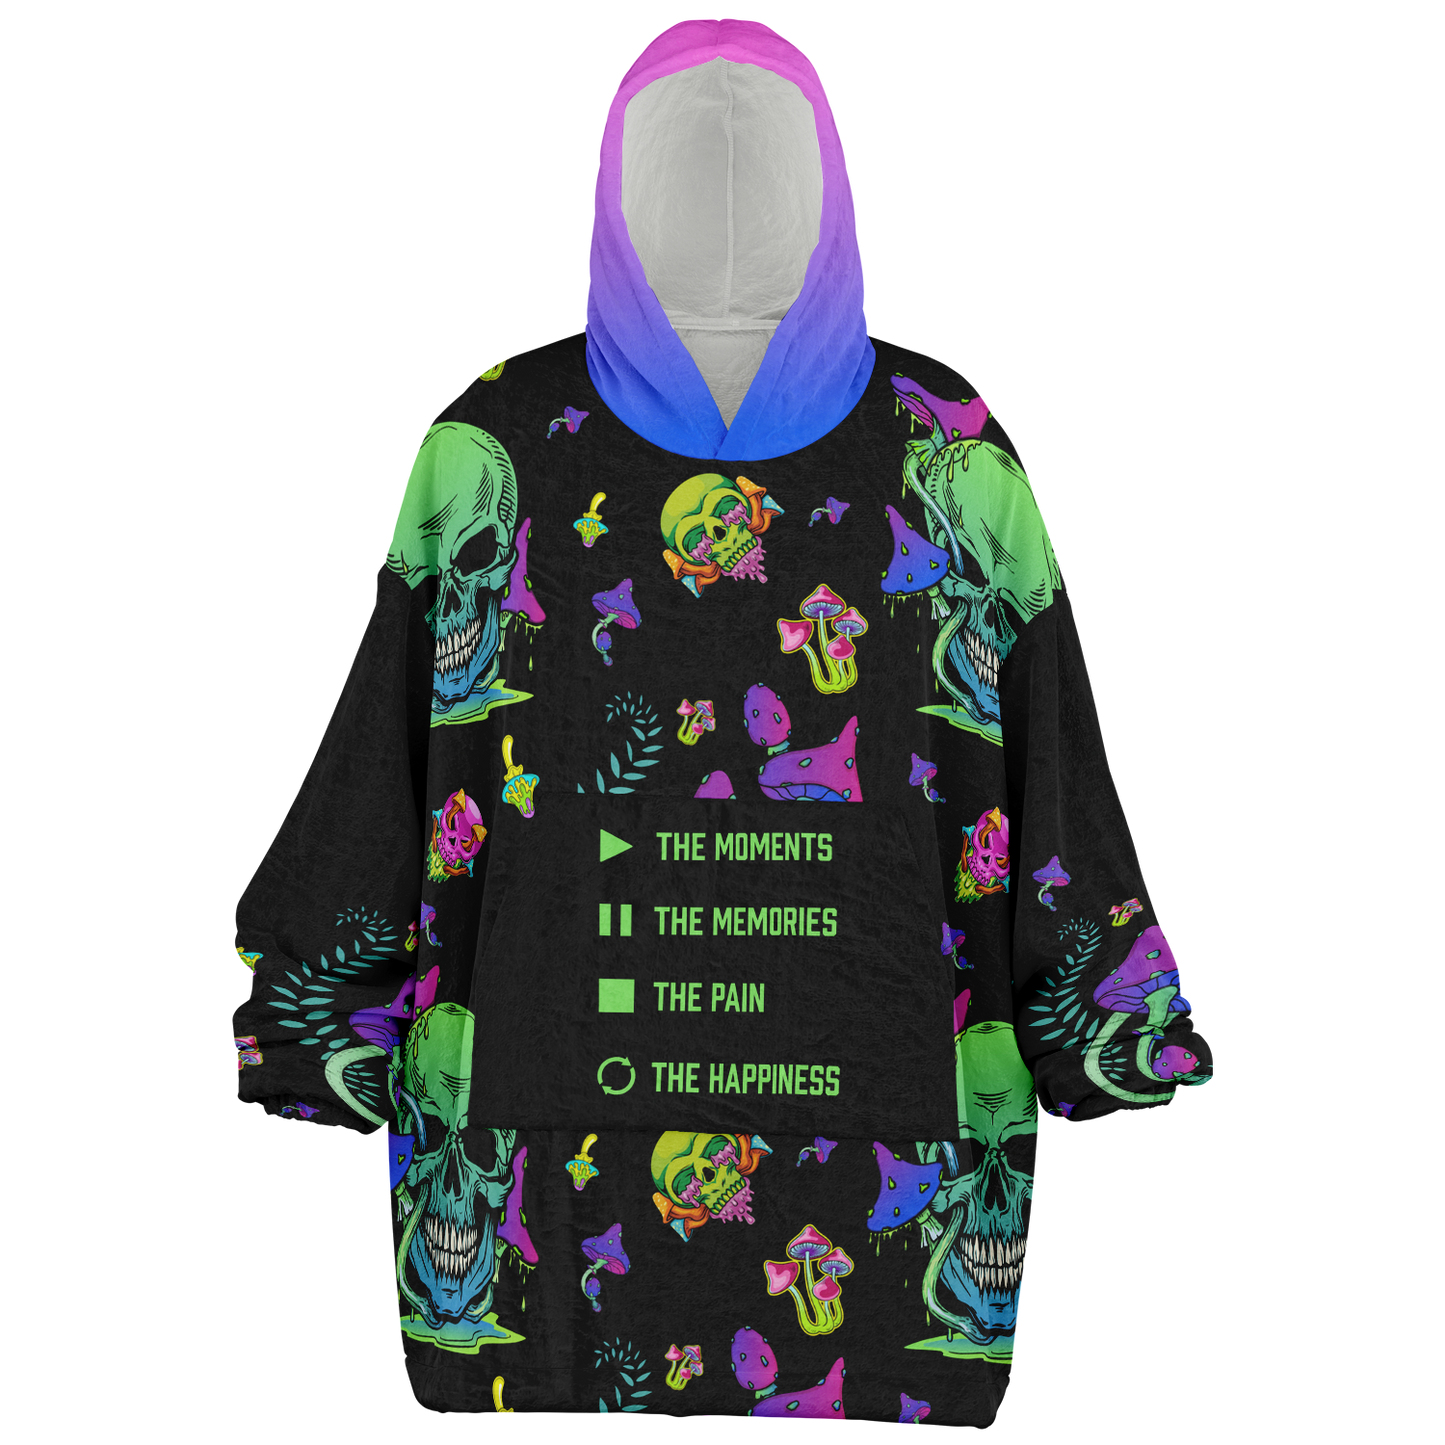 Play, Pause, Stop, Repeat Super Hoodie - Available for a Strictly LIMITED TIME - Buy 2 & Get FREE Shipping